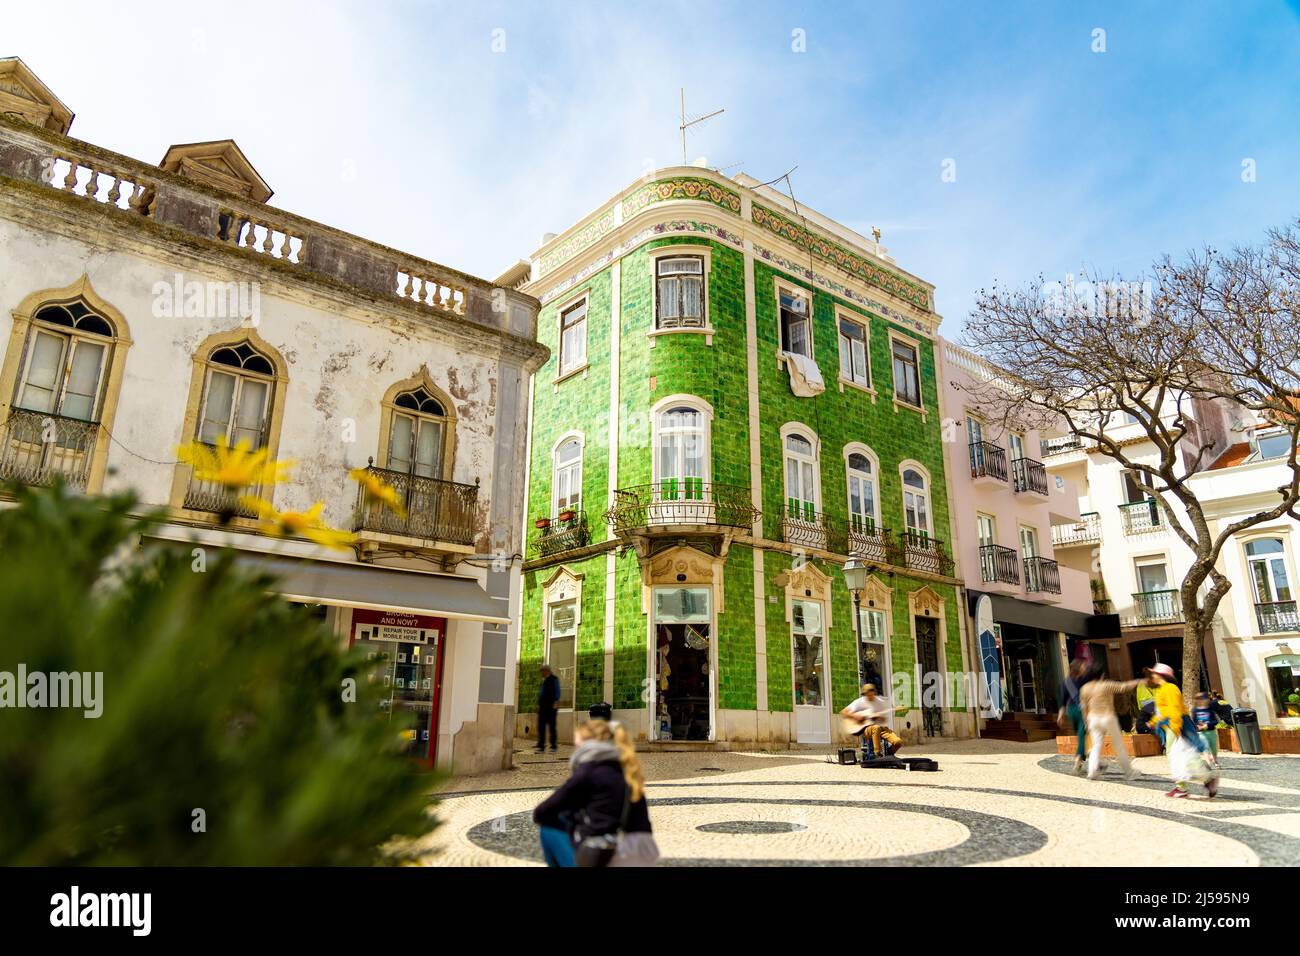 Historical town centre in Lagos, Algarve, Portugal with moving people and a building with green ceramic tiles. Stock Photo